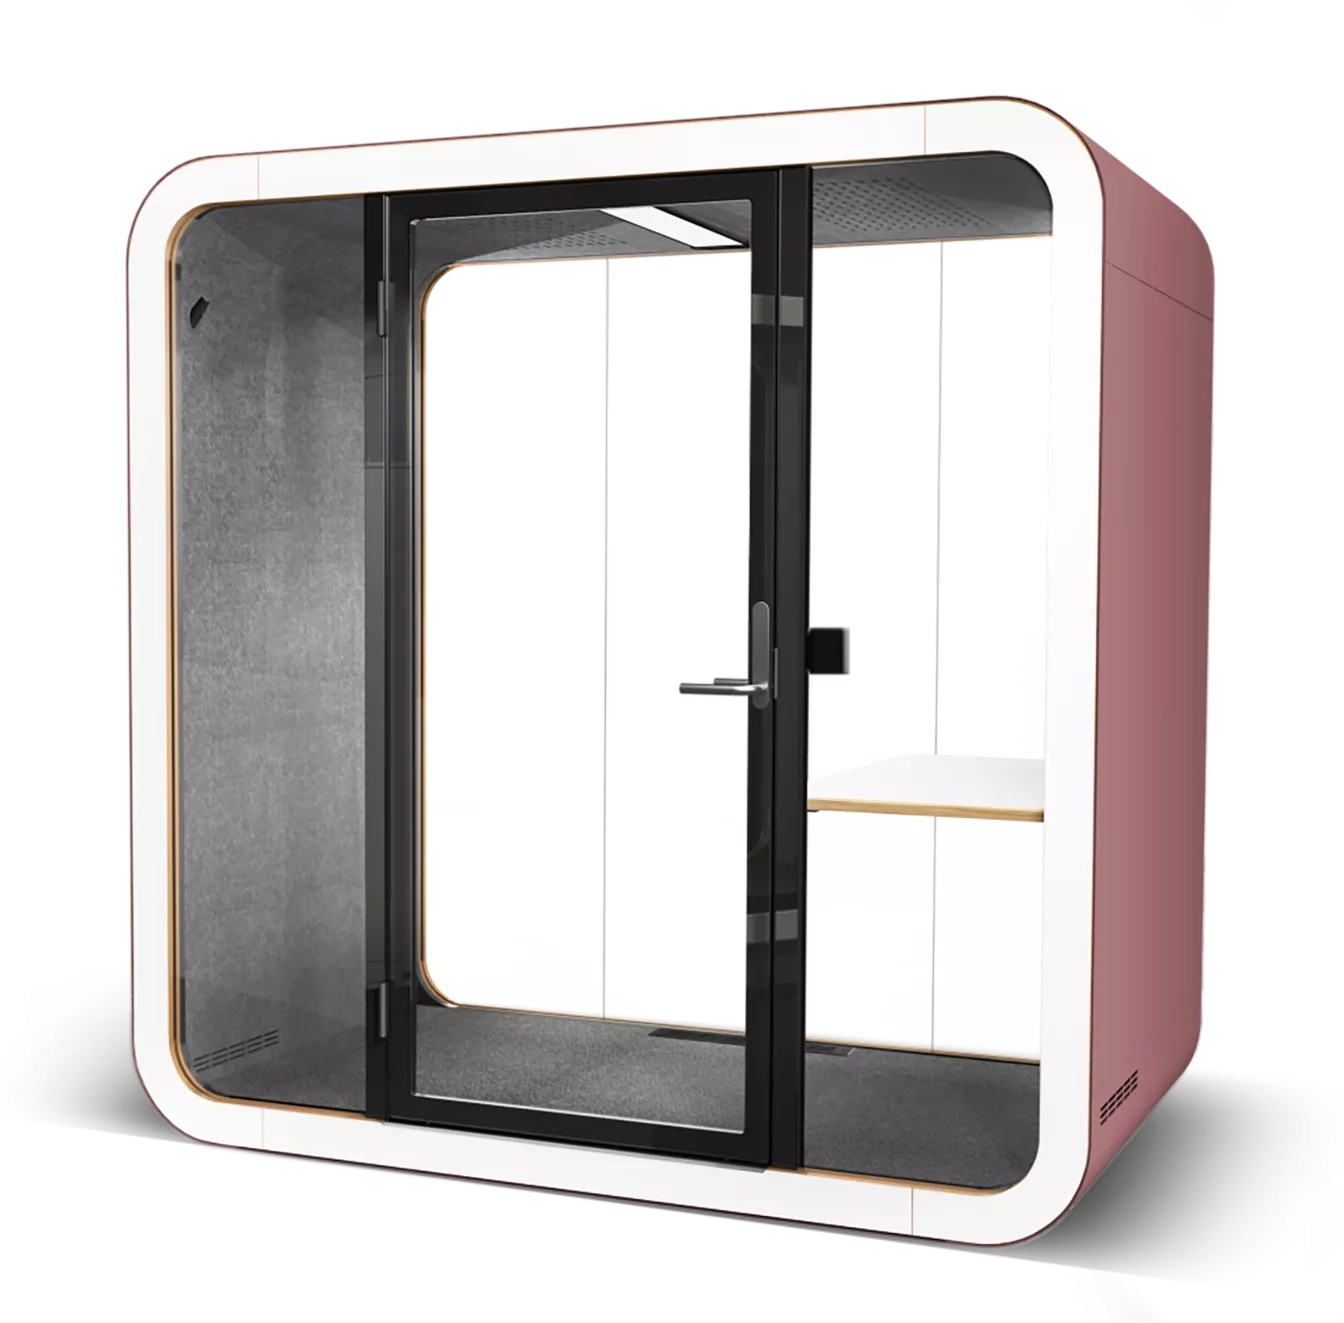 Blush colored Framery Q meeting pod with a Flow layout.